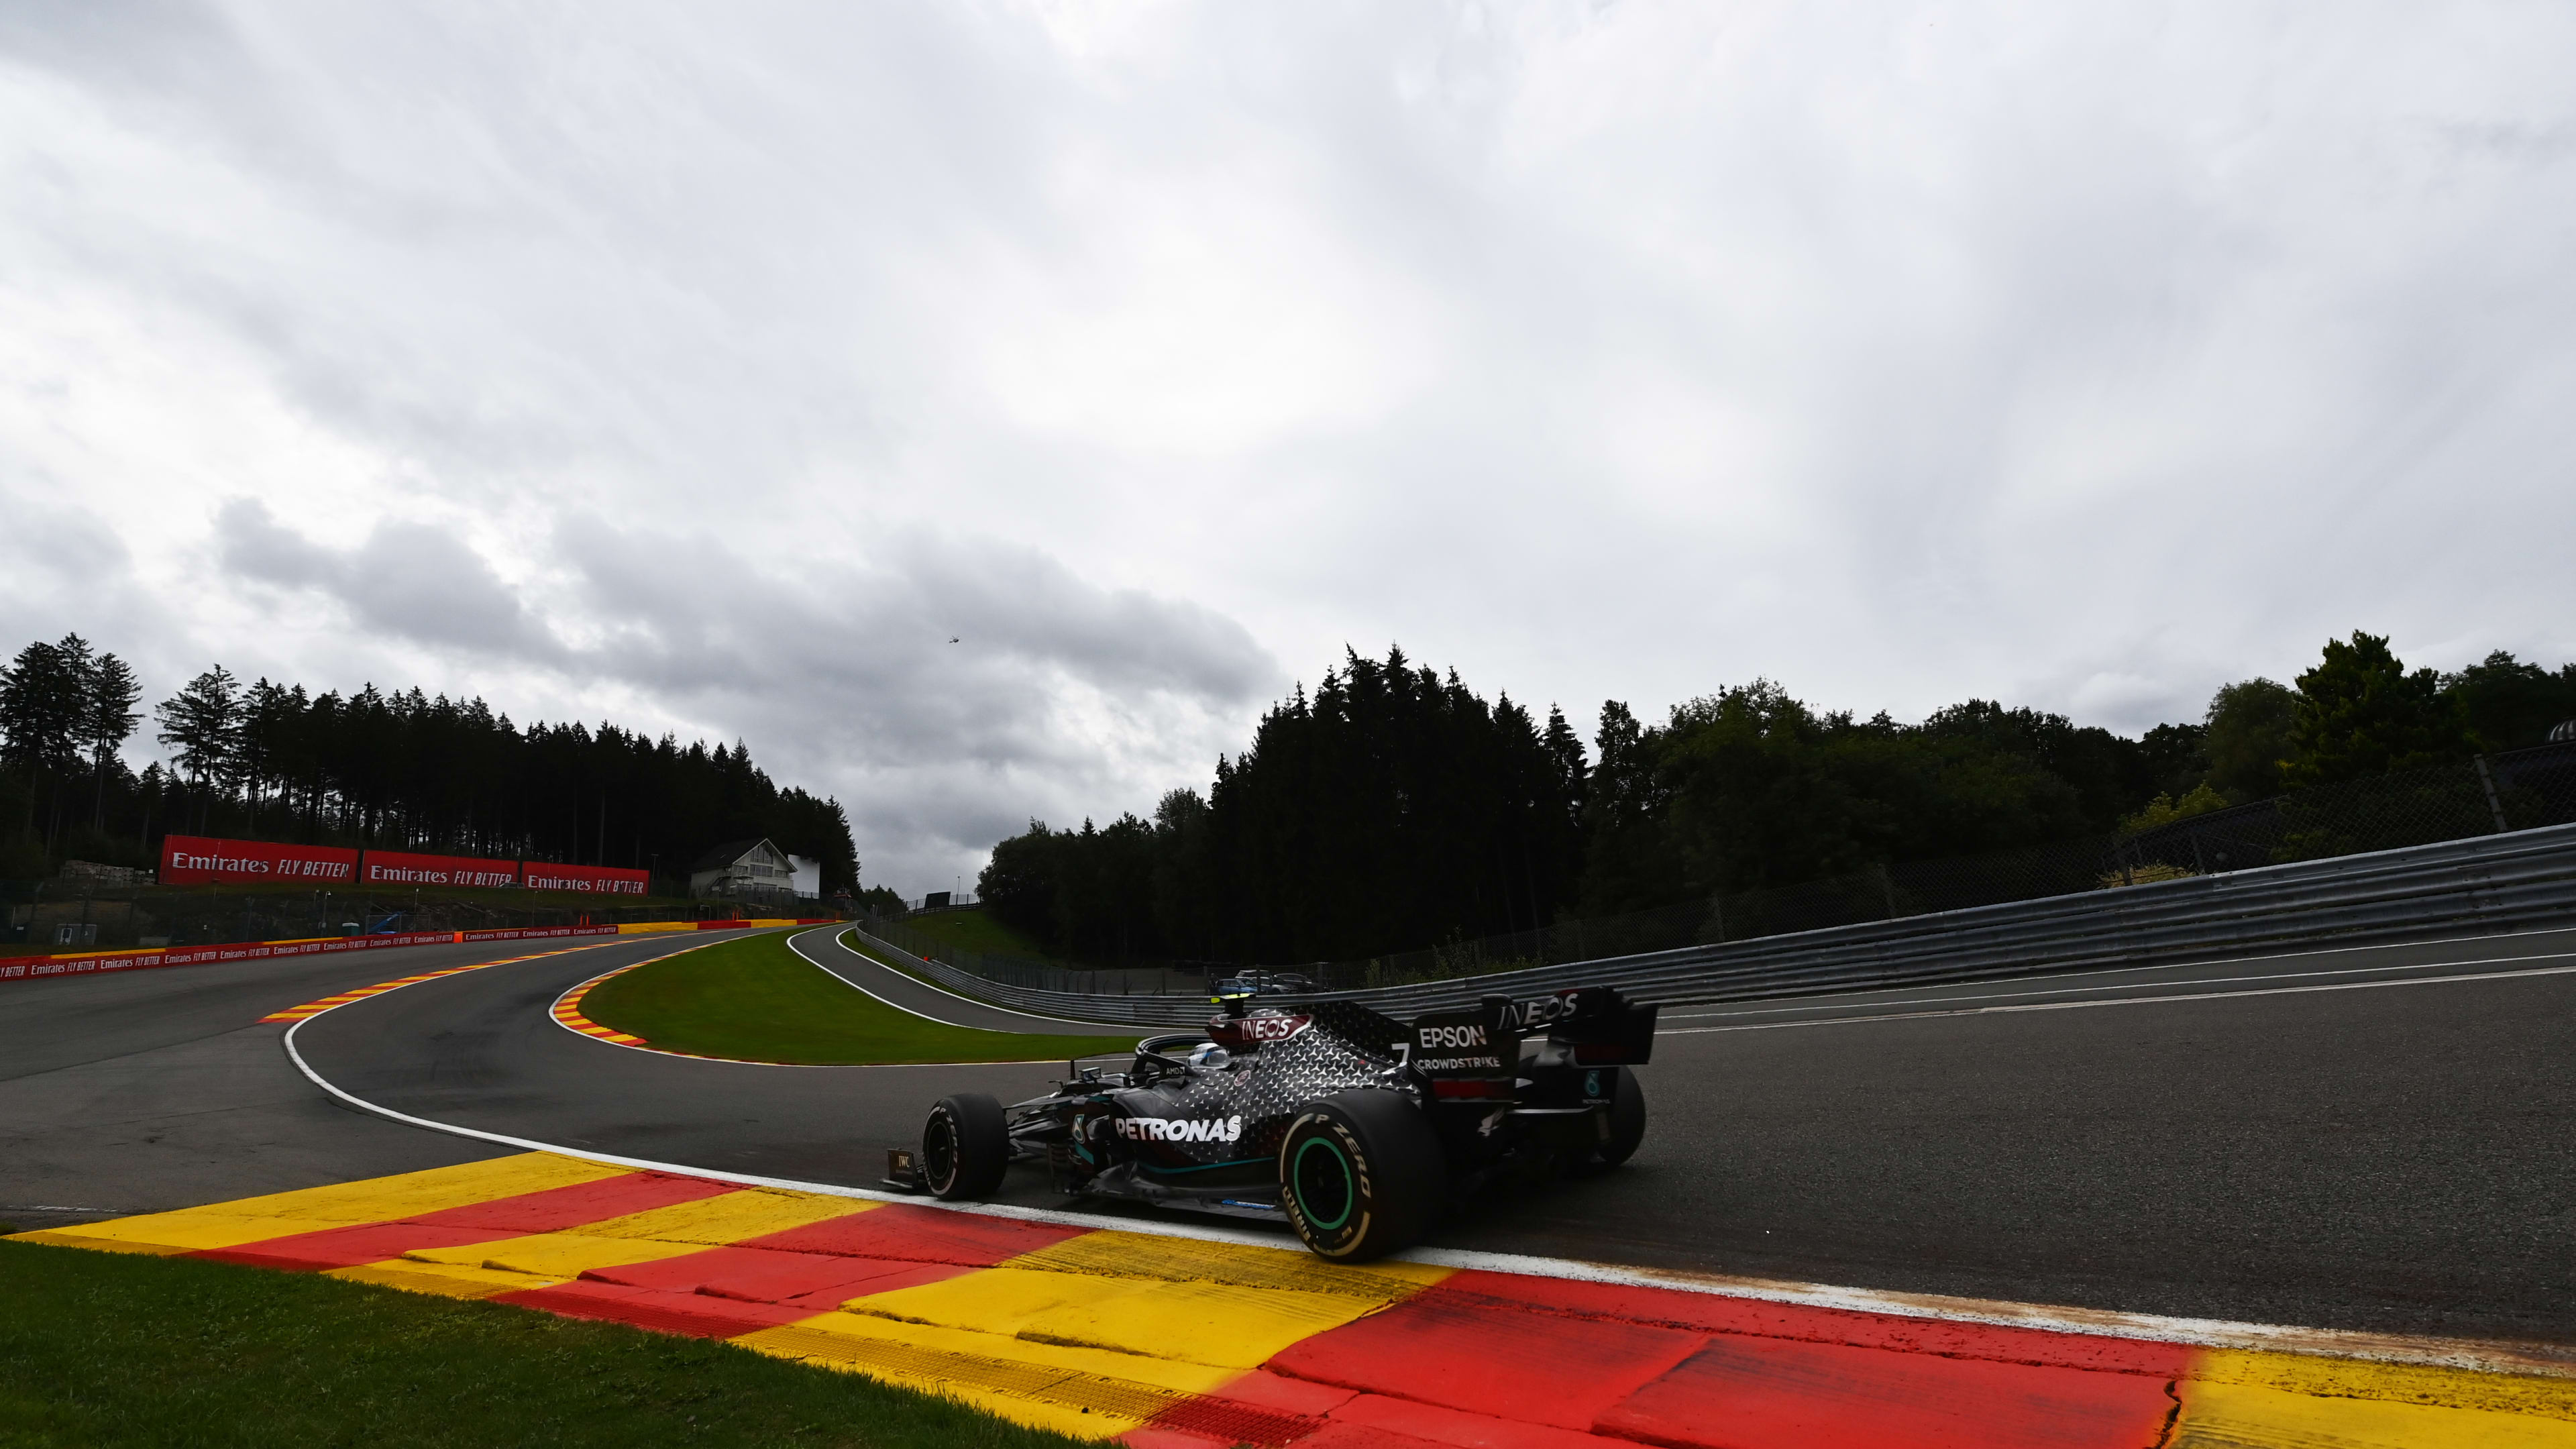 2020 Belgian Grand Prix FP1 report and highlights Bottas leads tight battle at top of the time sheets in Belgian GP first practice as Ferrari struggle Formula 1®